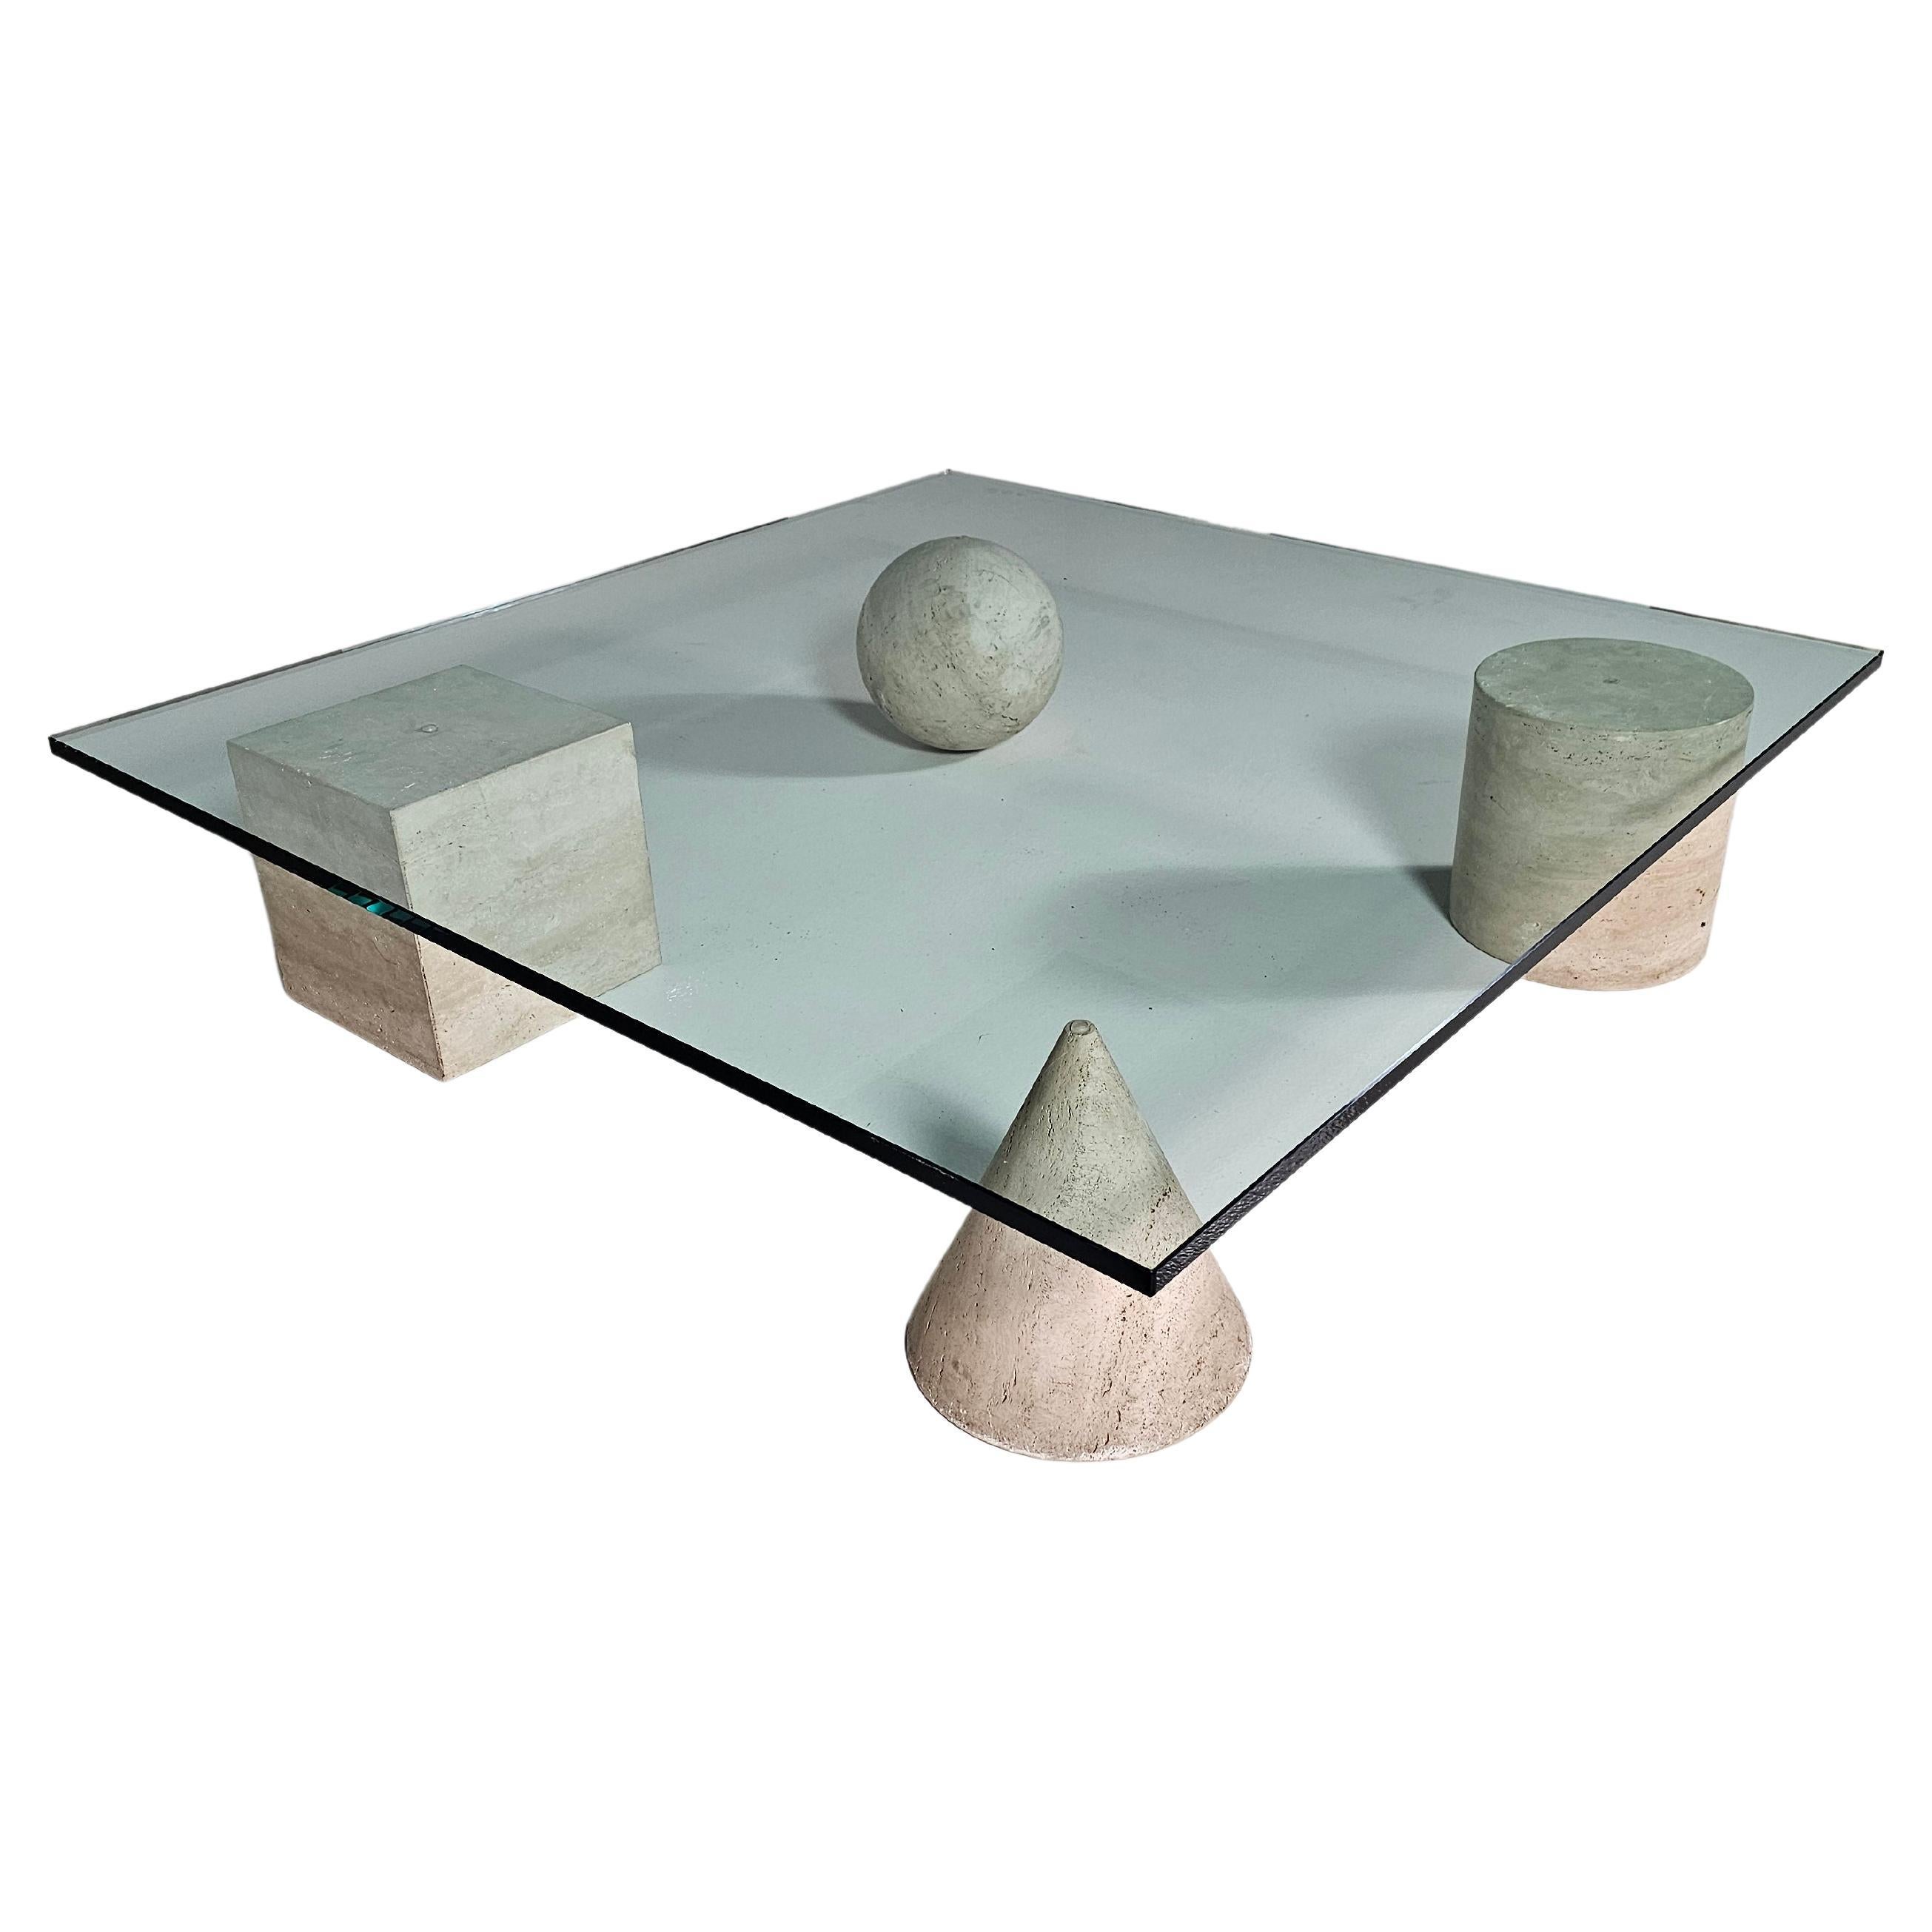 Metafora coffee table by Massimo and Lella Vignelli for Casigliani Italy, 1970s For Sale